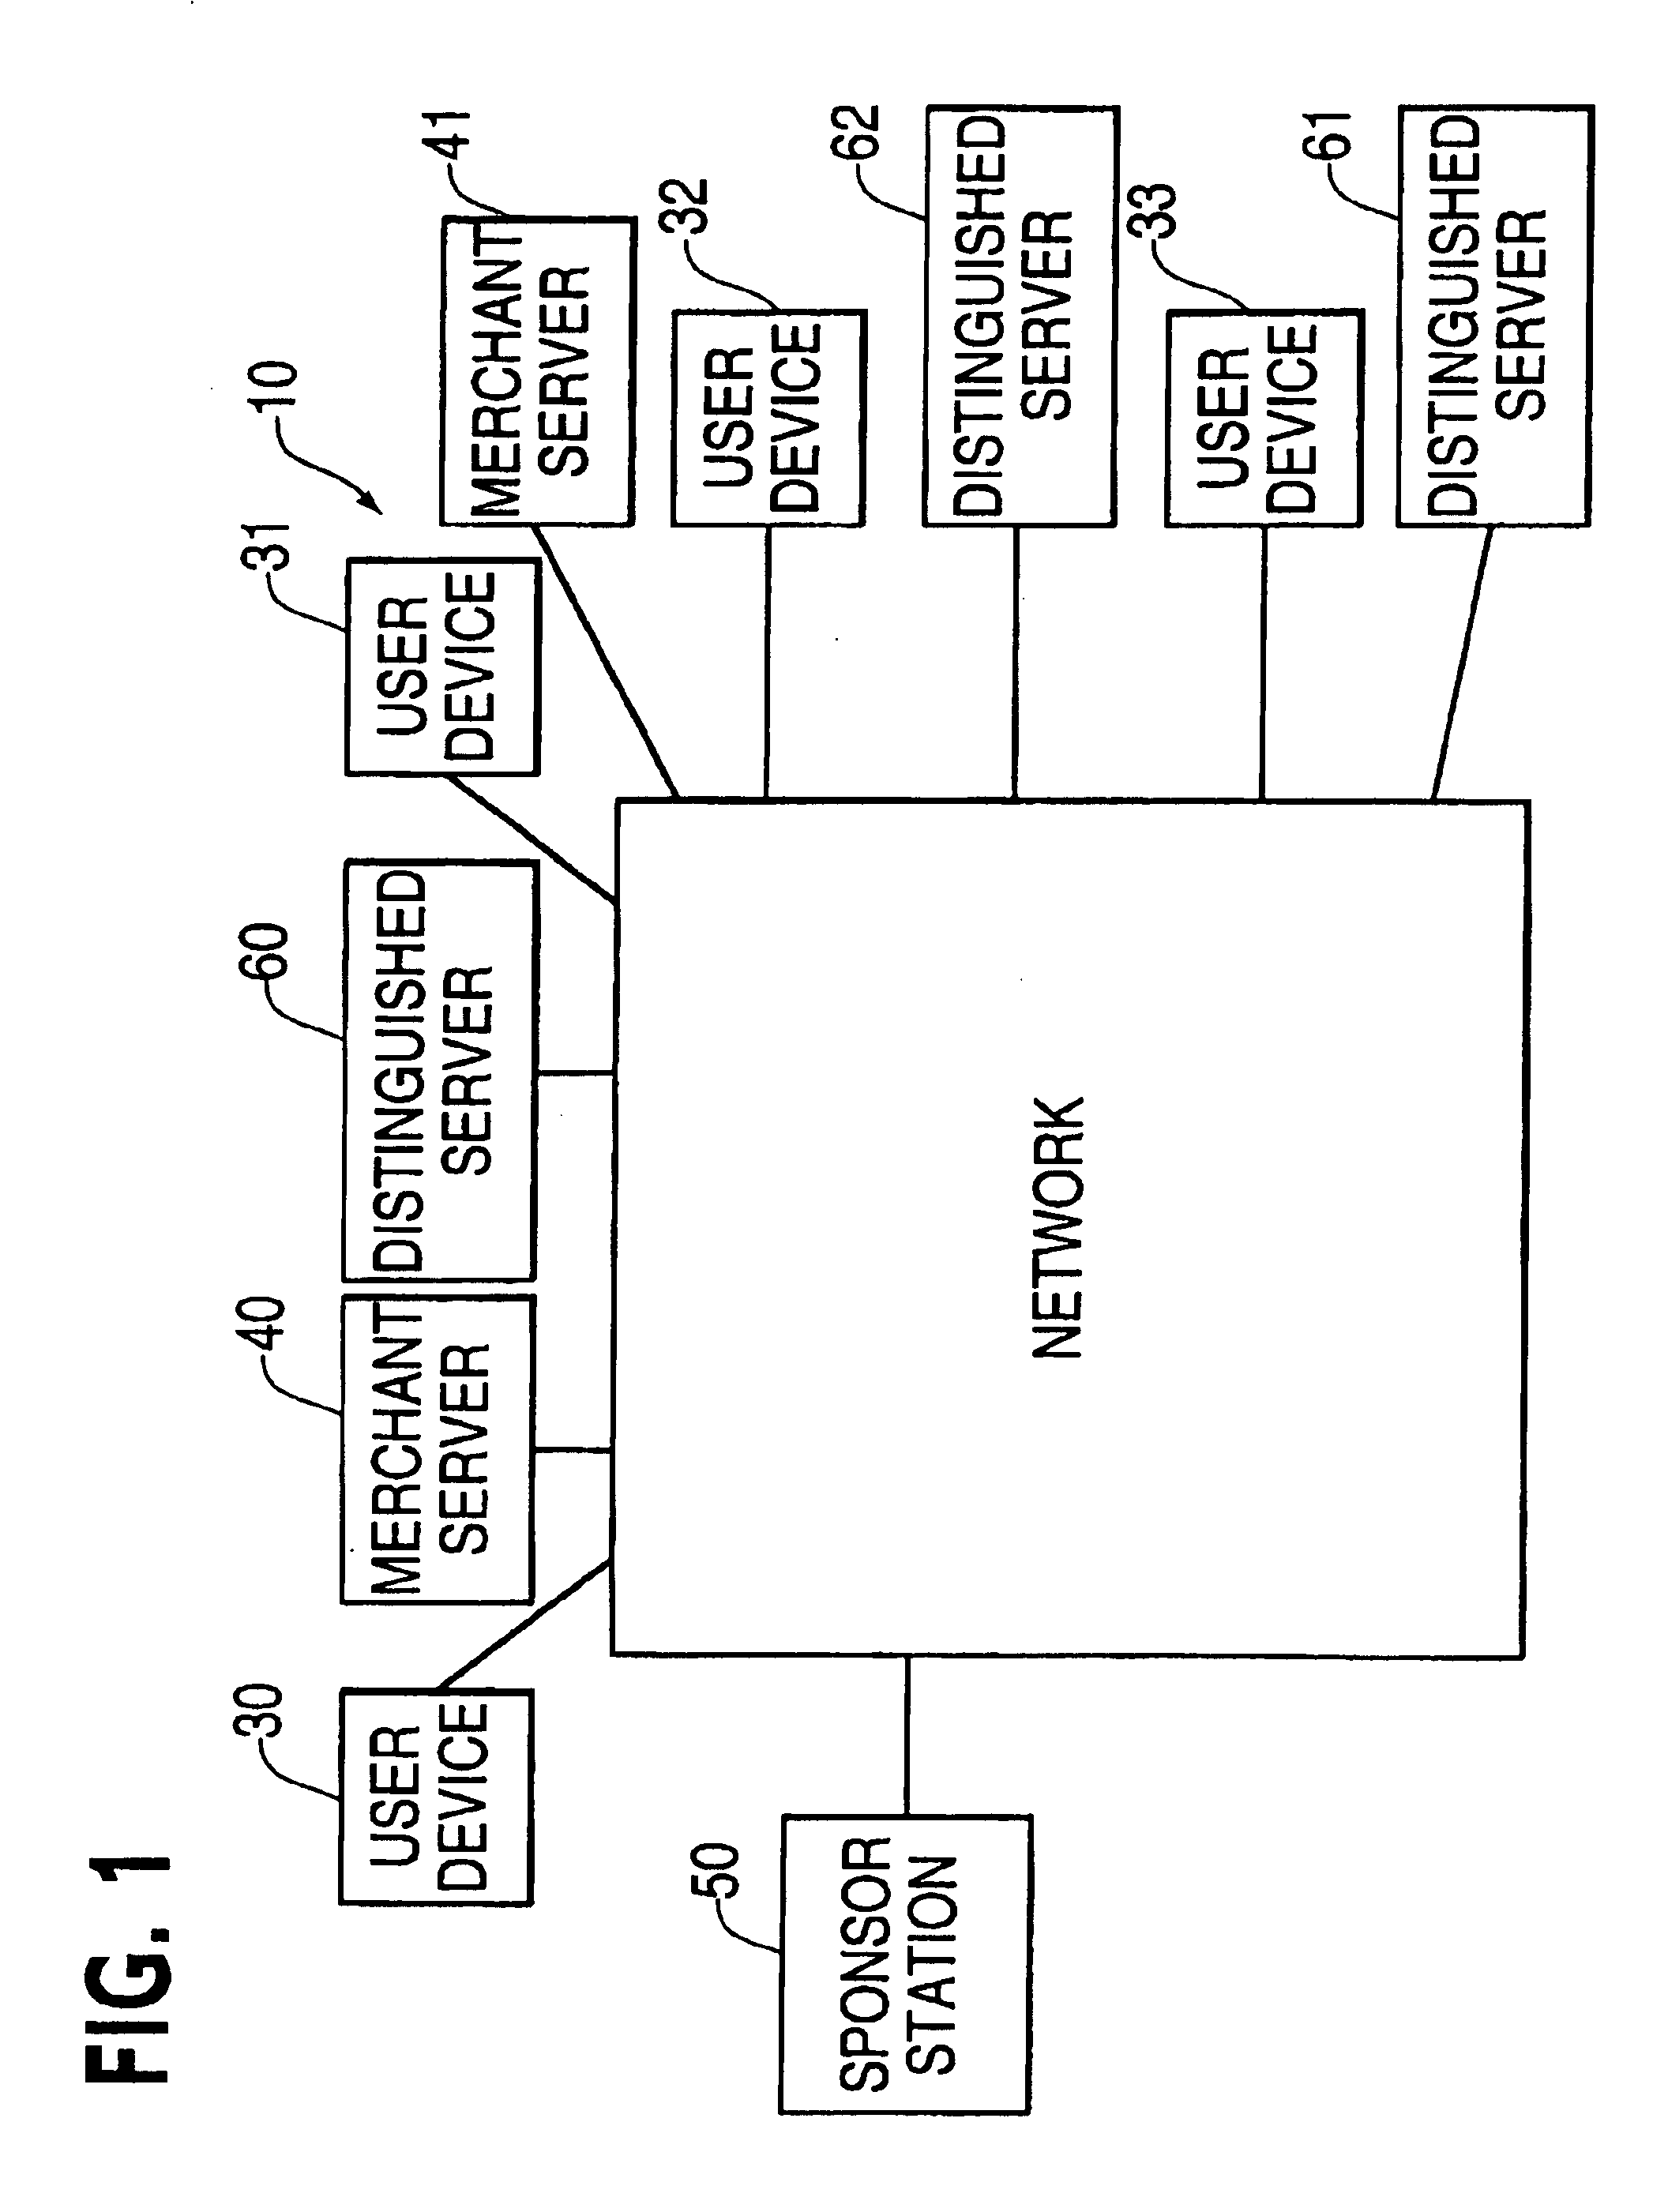 System and method for password throttling